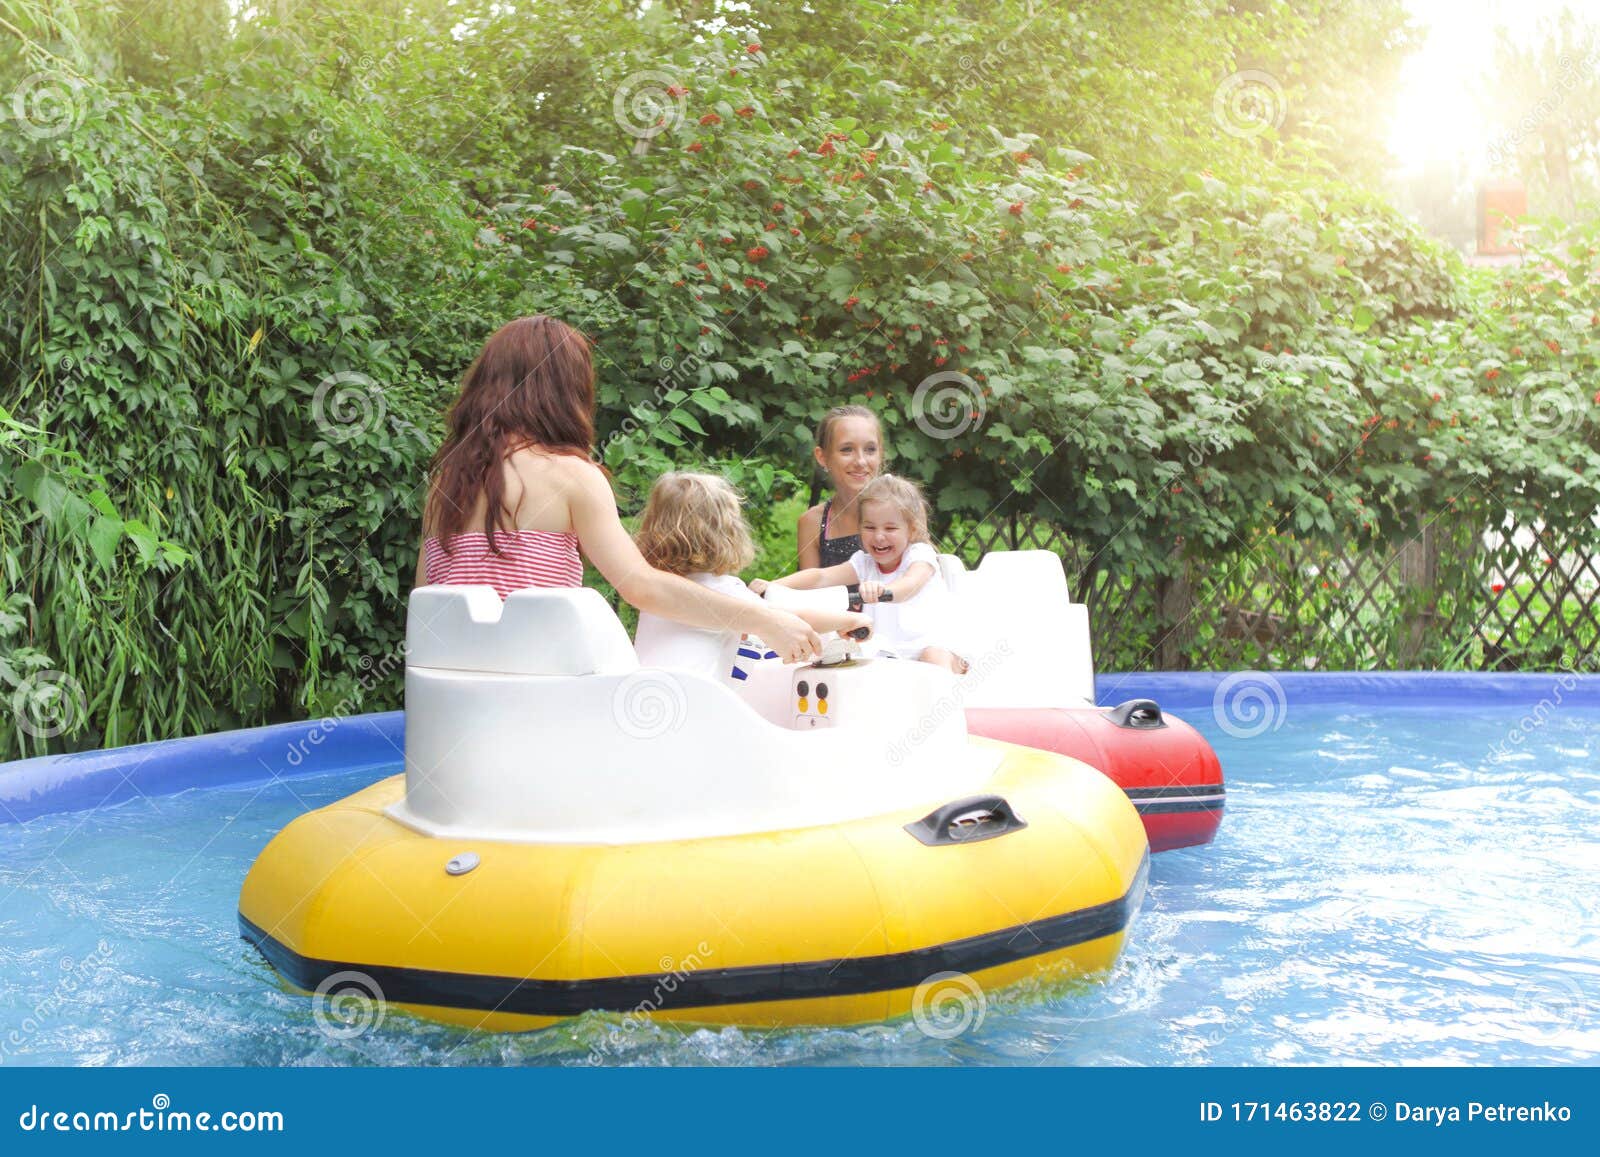 Mother With Kids Riding Bumper Boats Stock Photo - Image ...